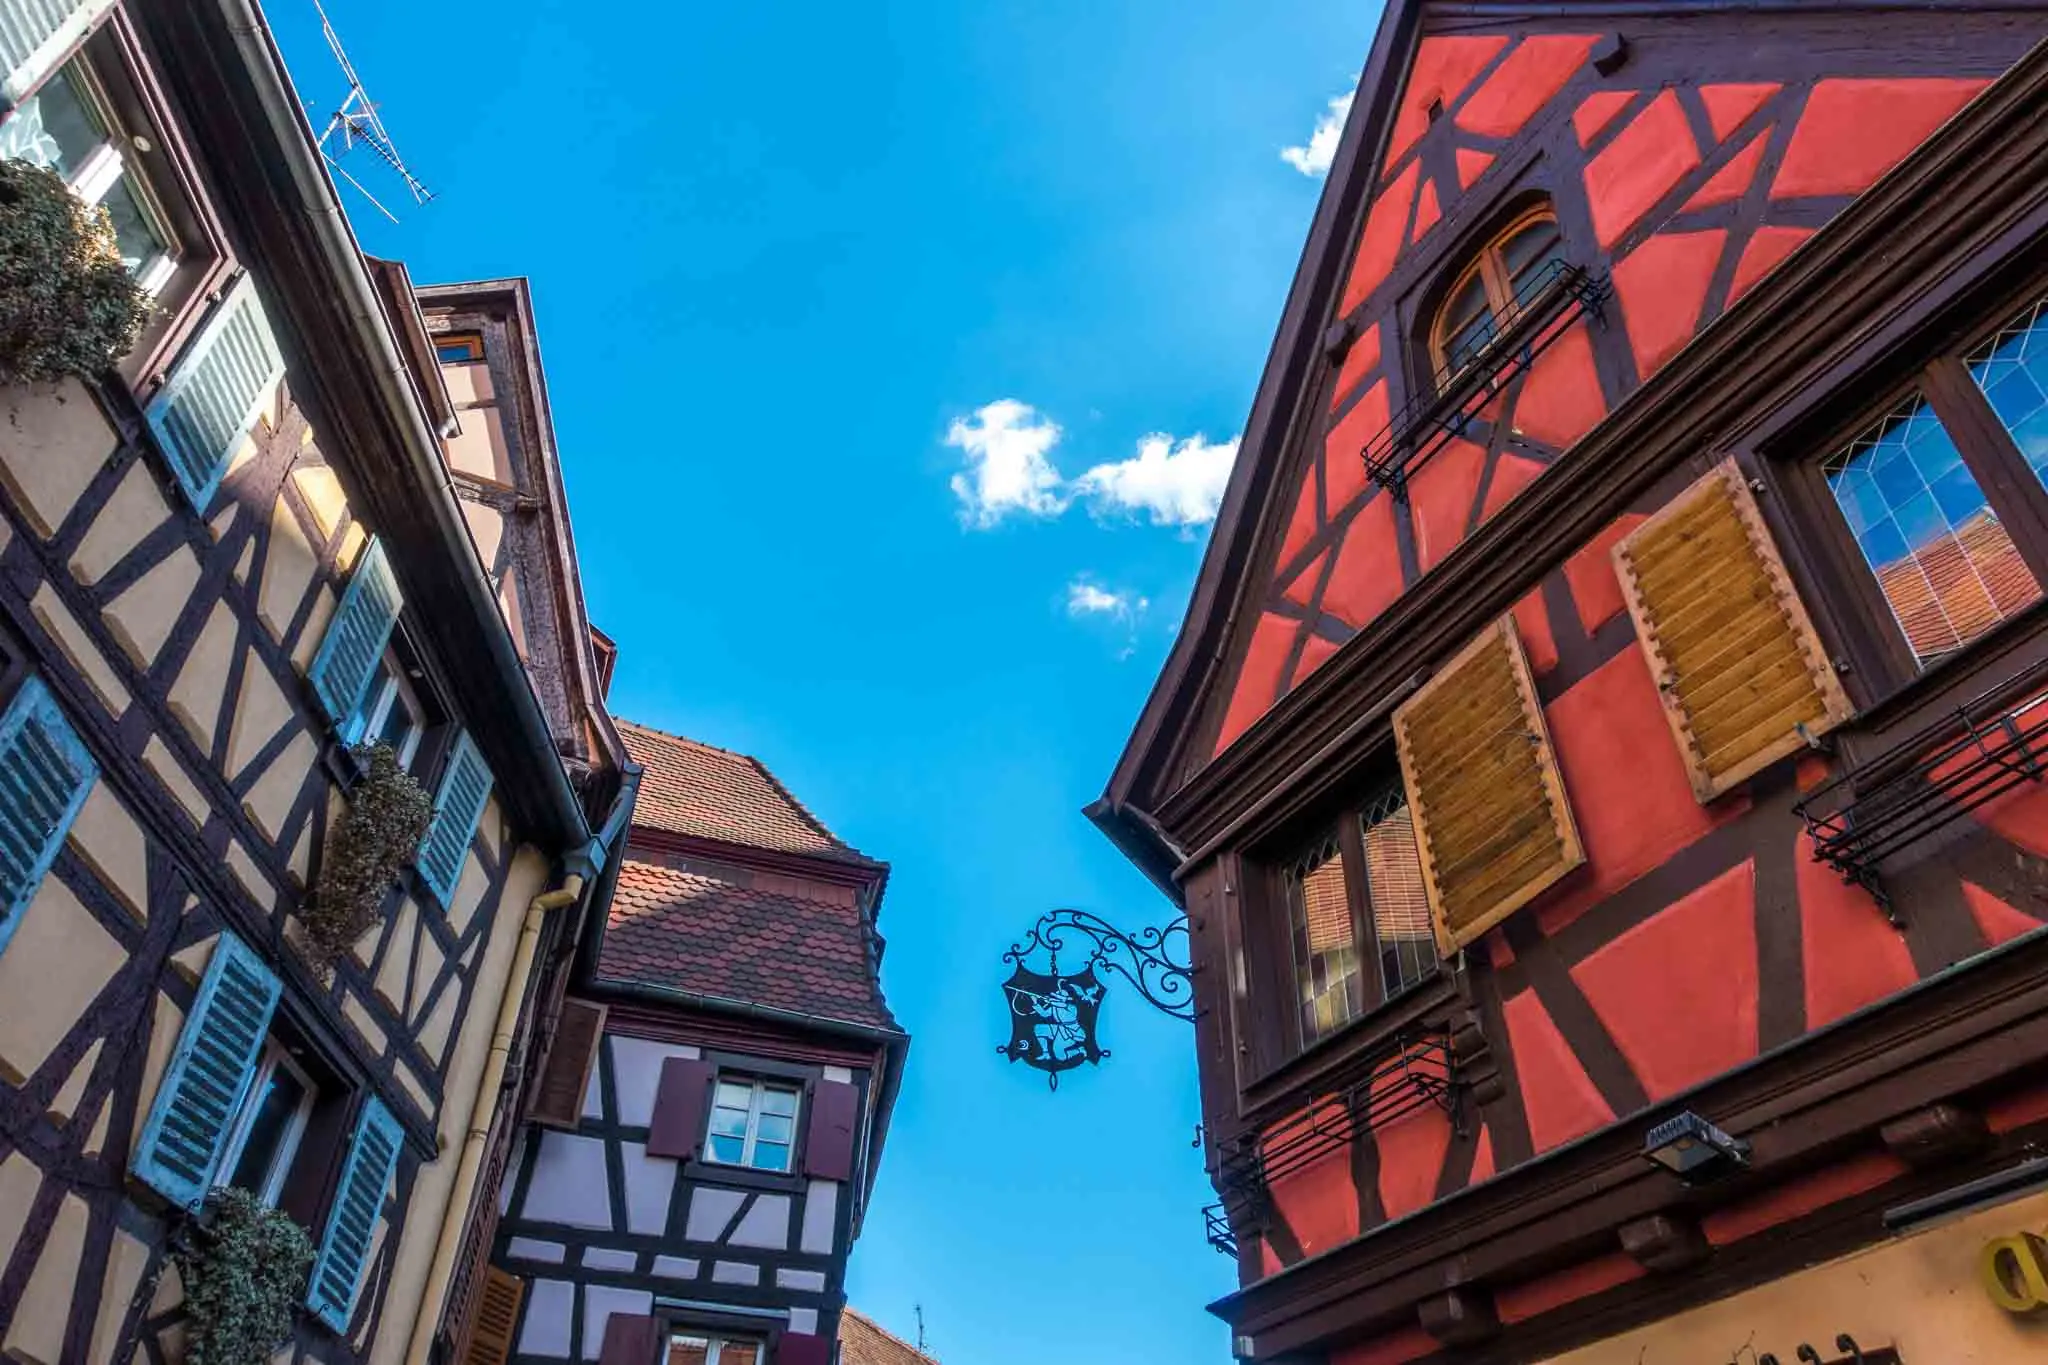 Half-timbered buildings with an iron sign